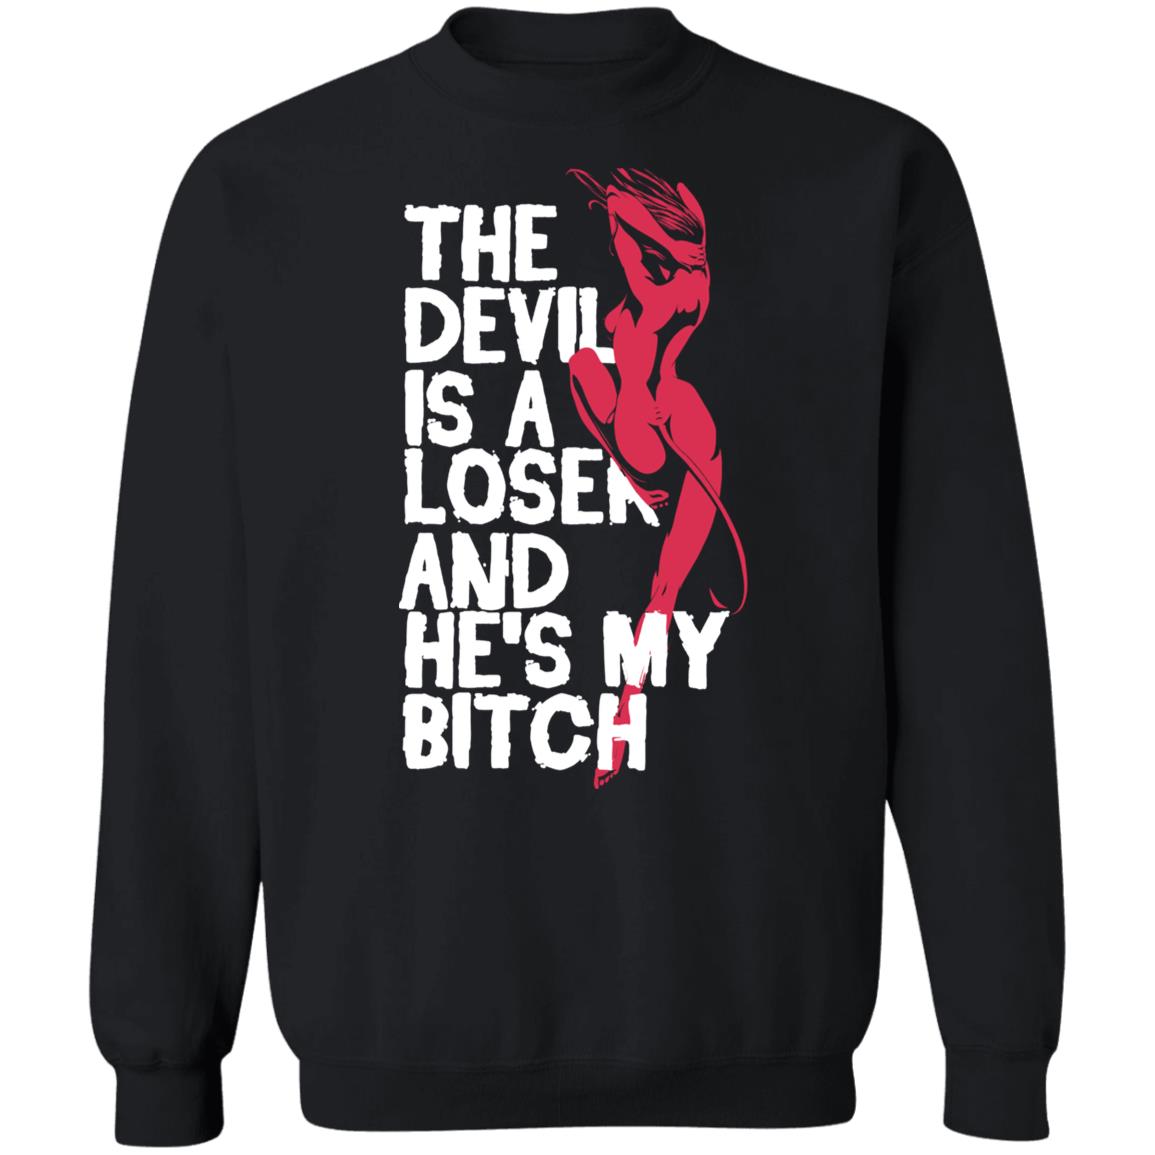 The Devil Is A Loser And He’s My Bitch Shirt 2